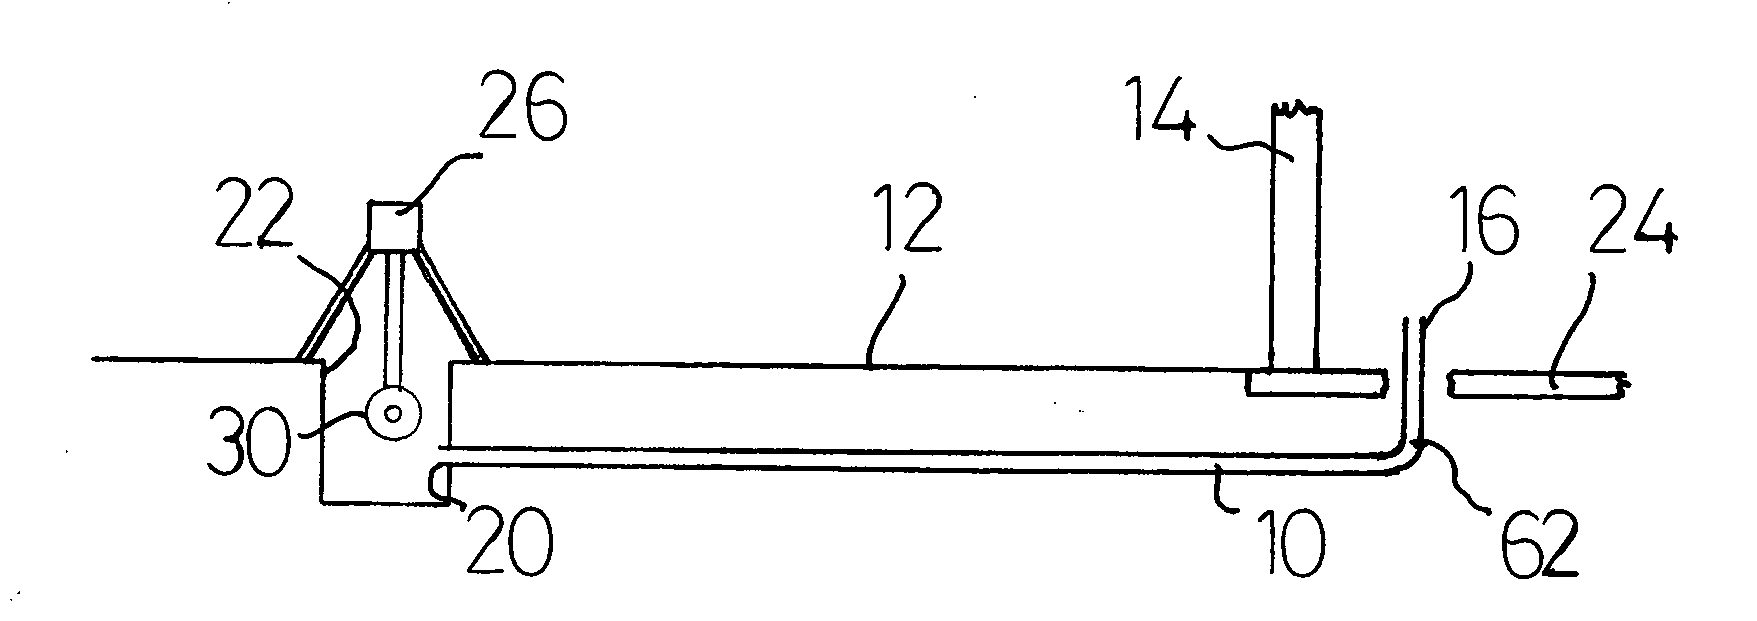 Method for replacing pipes, and apparatus therefor